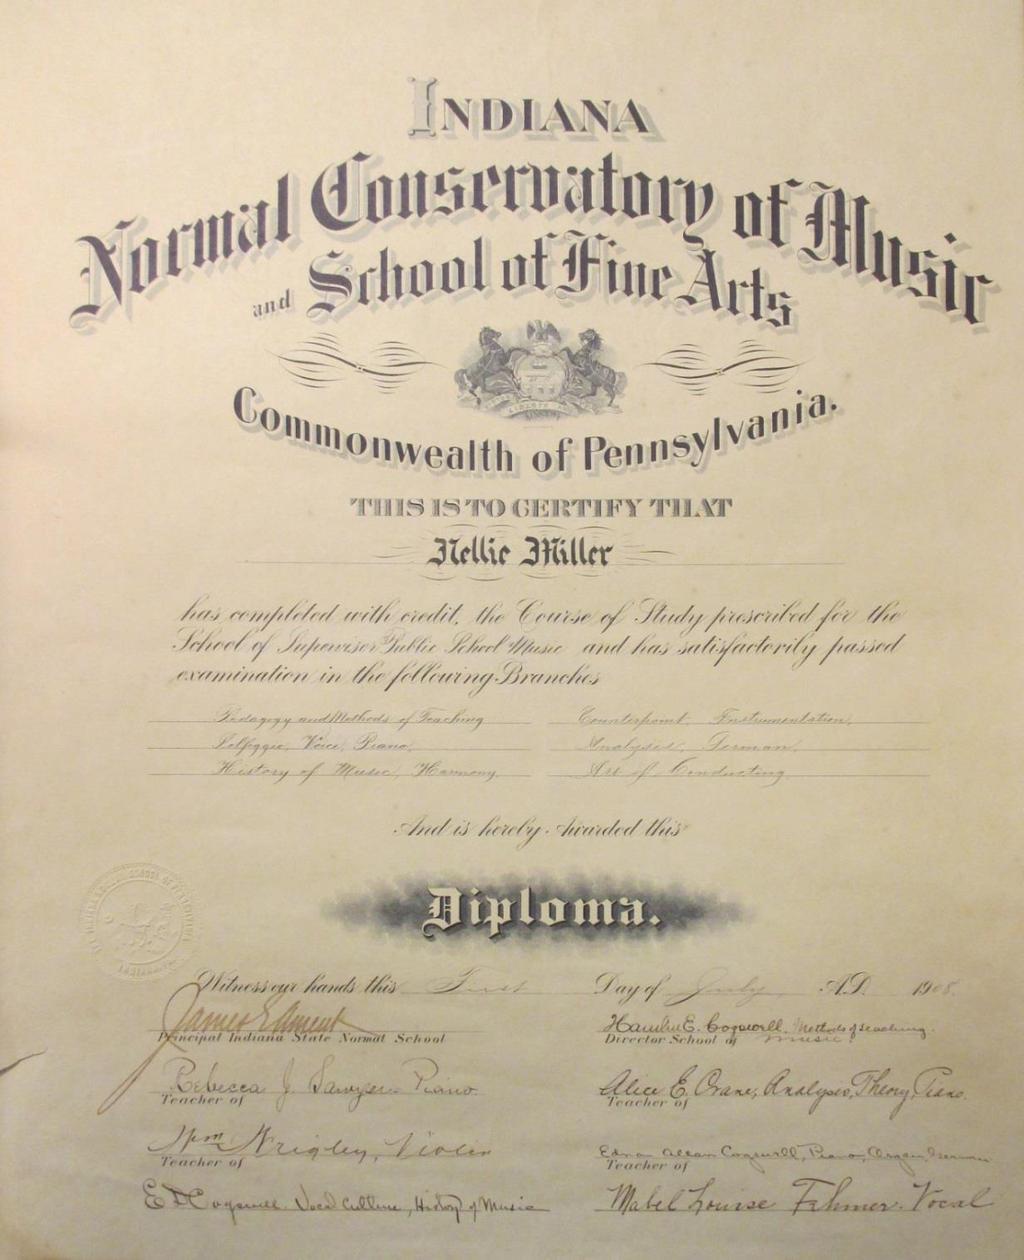 Record Group 33: The Department of Music 12 Conservatory of Music and School of Fine Arts Diploma, Indiana State Normal